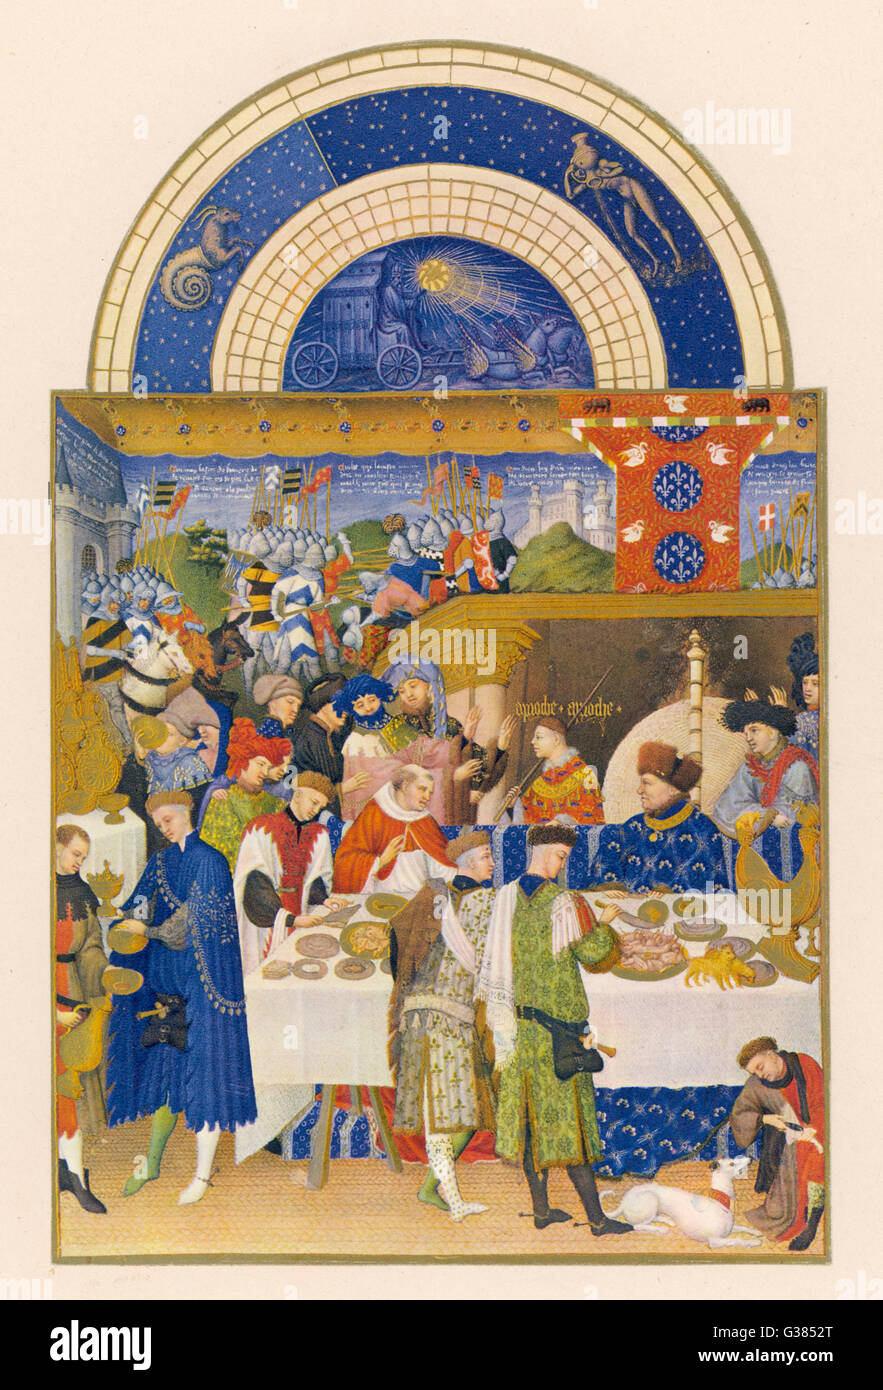 JANUARY The Duc de Berry at table,  surrounded by courtiers        Date: 1409 - 1487 Stock Photo